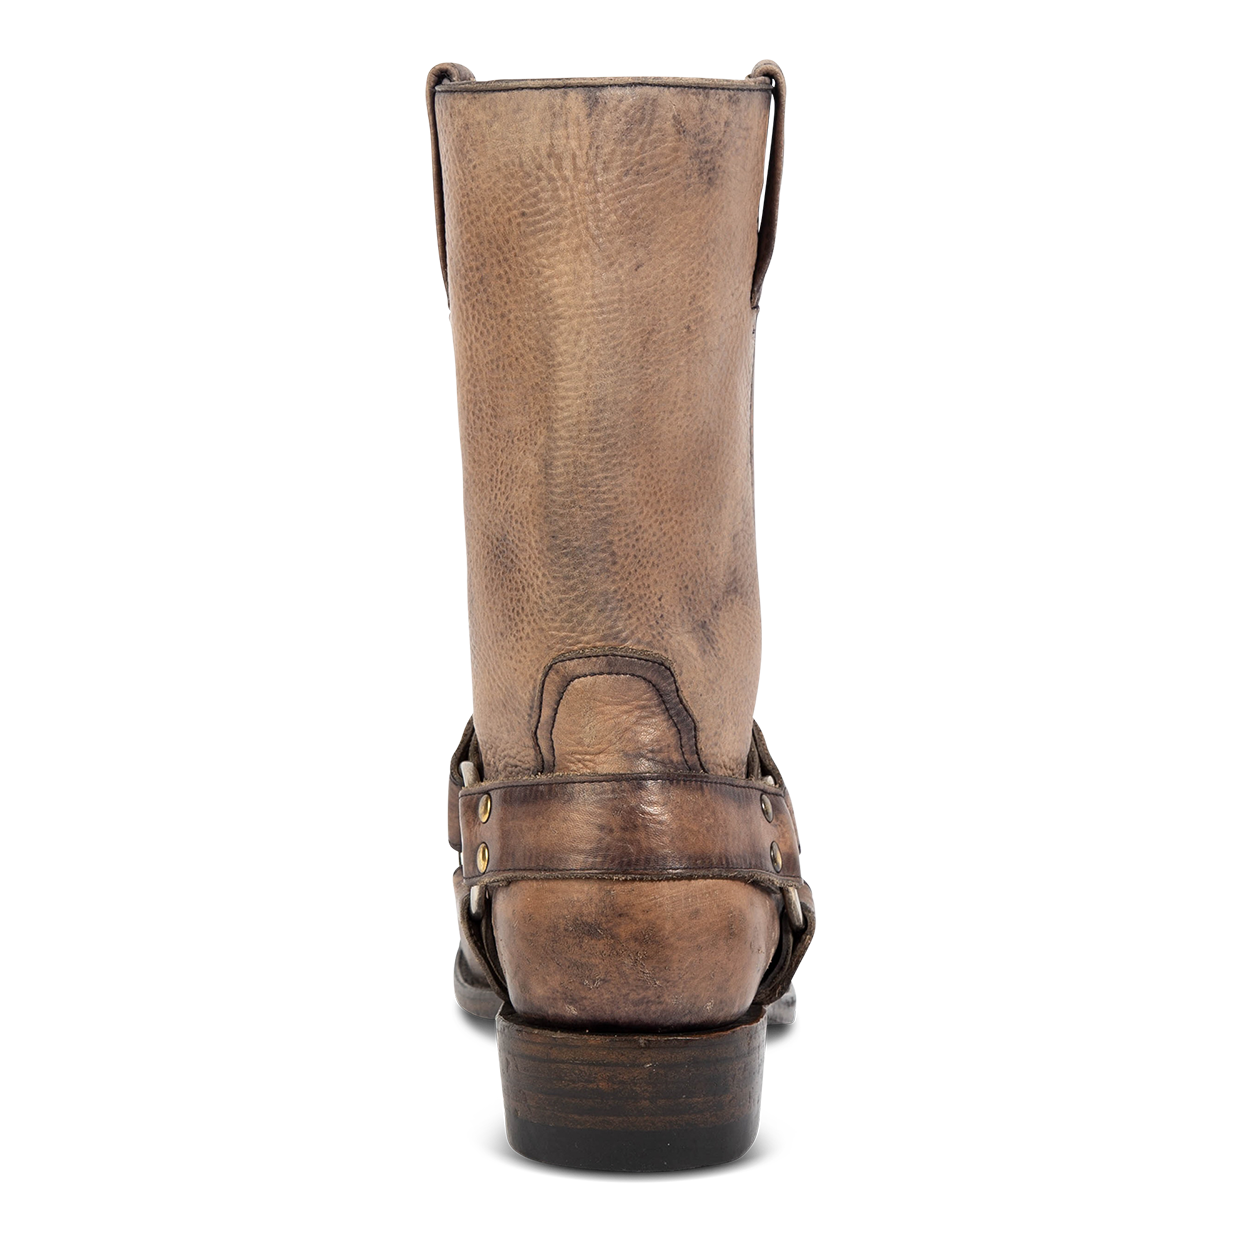 Back view showing distressed heel and leather ankle harness on FREEBIRD men's Copperhead grey distressed boot